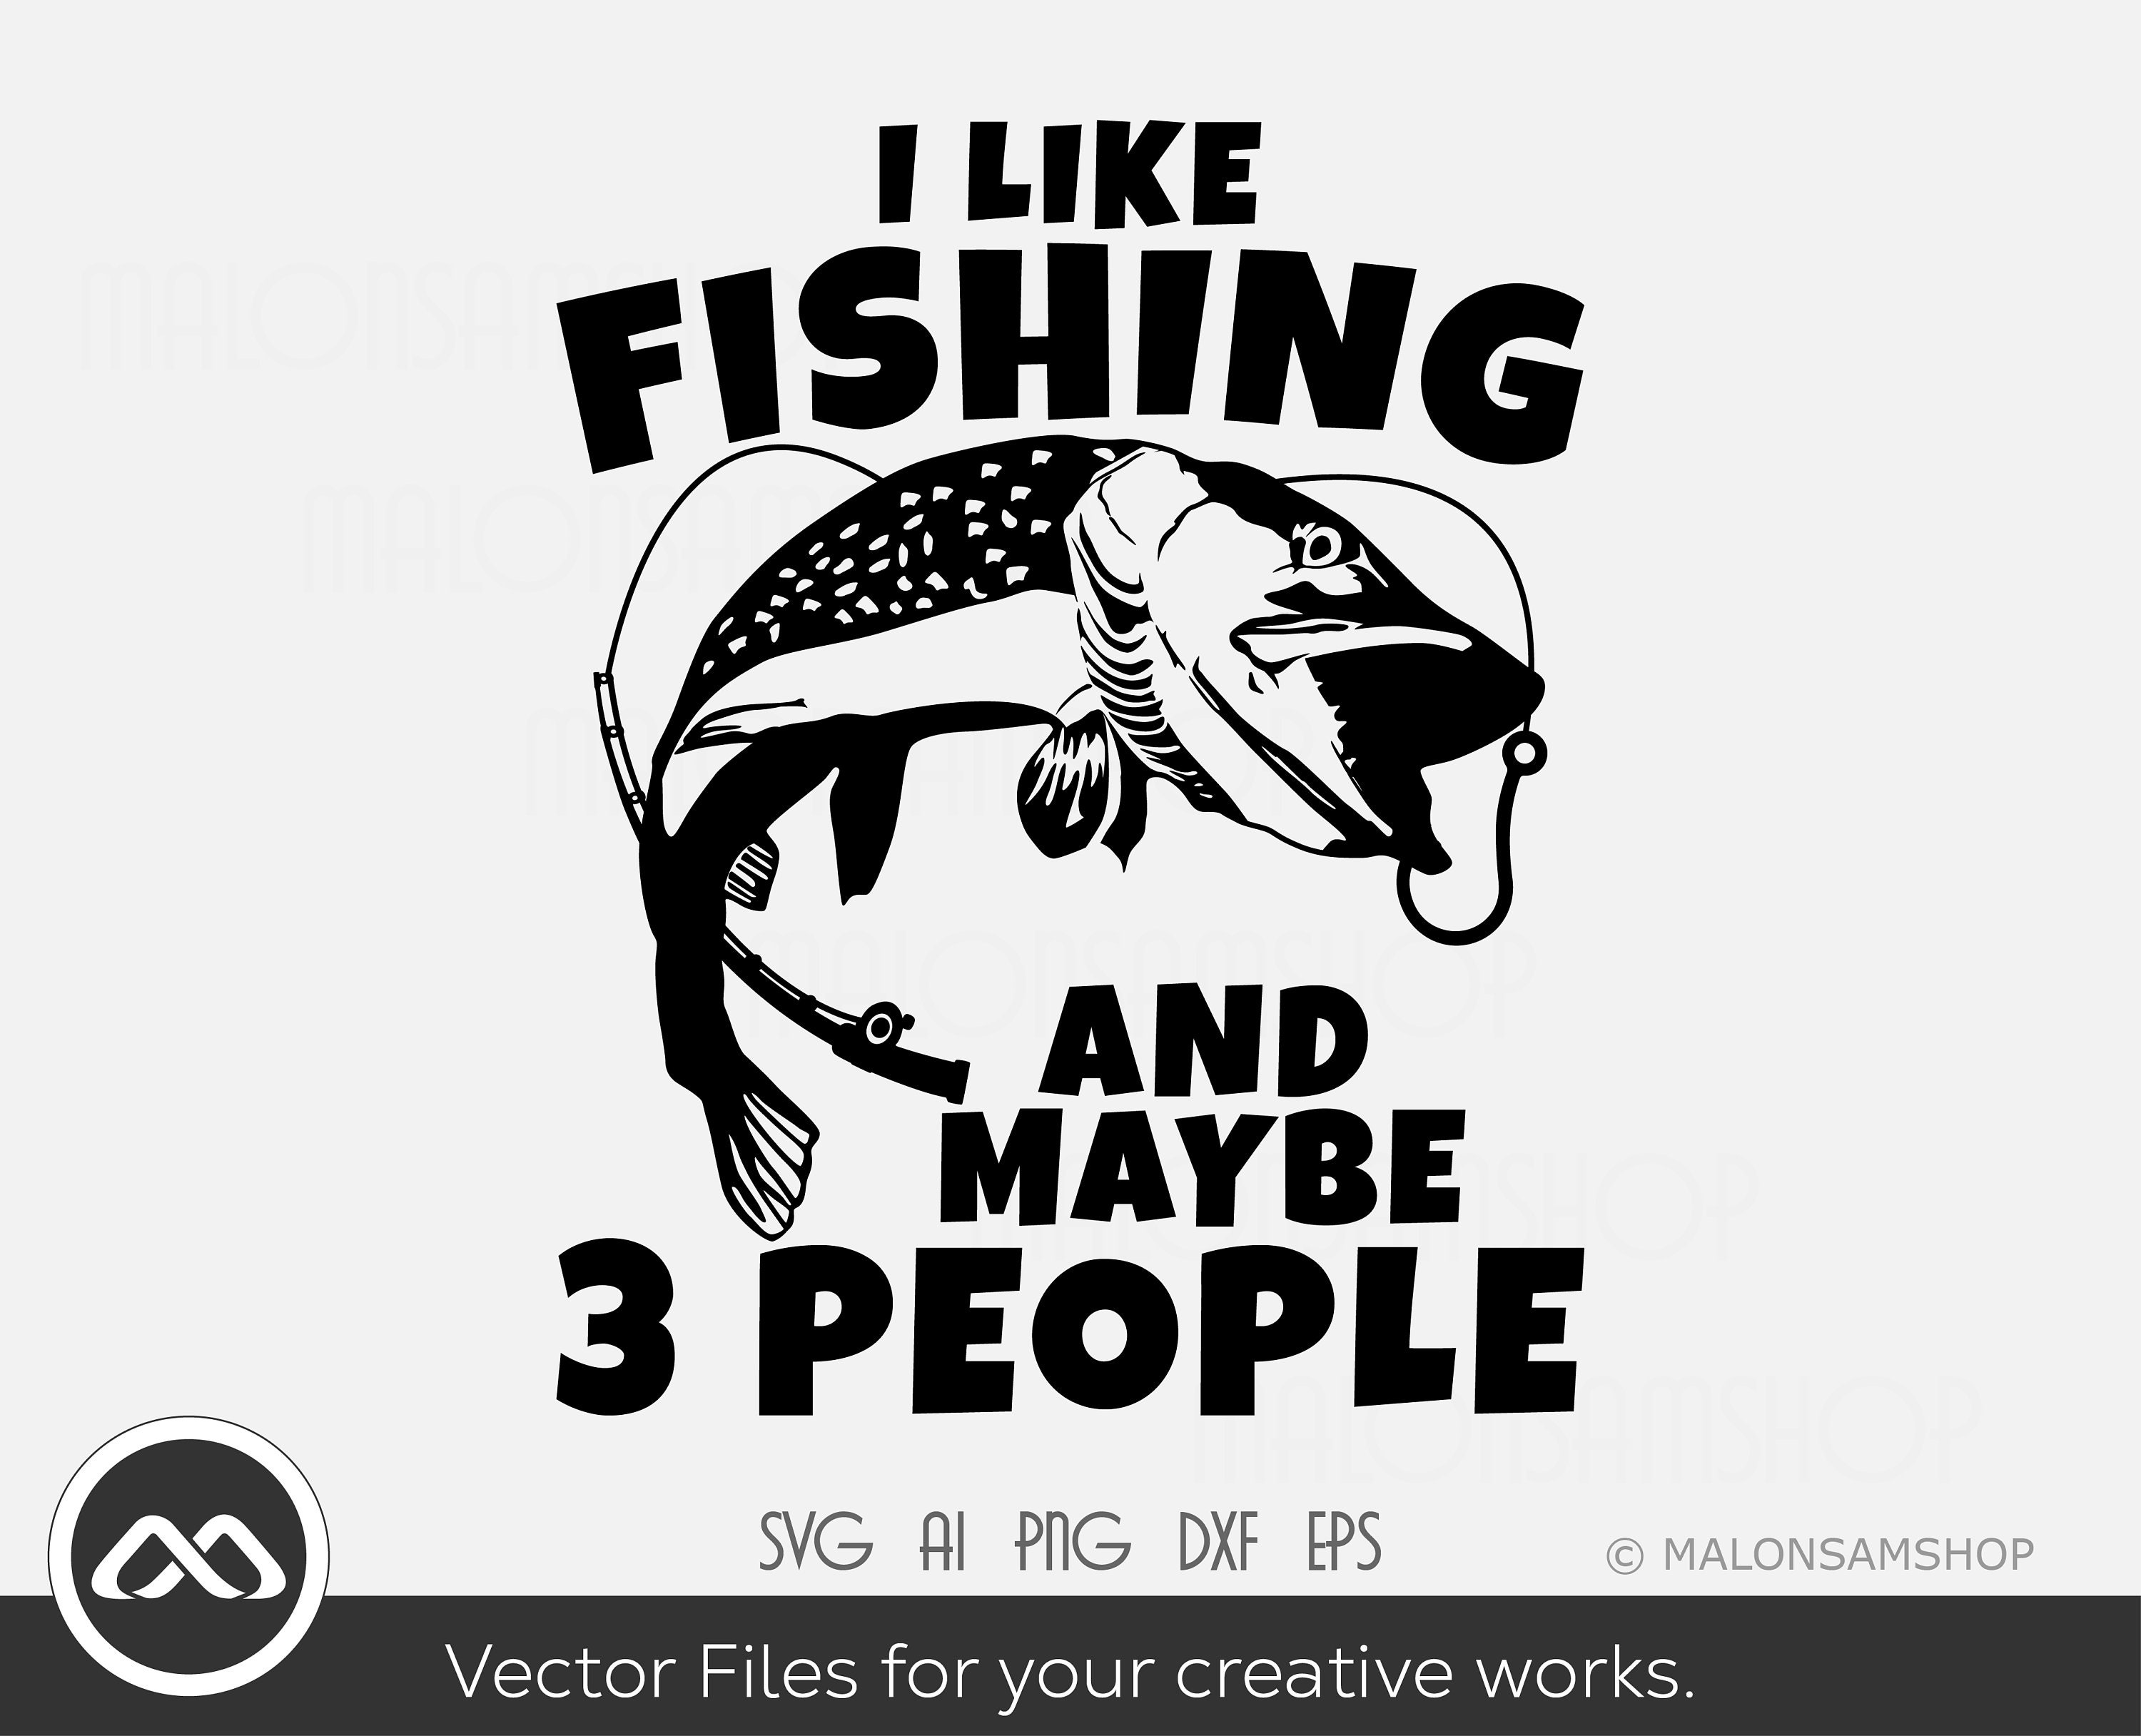 Fishing SVG I Like Fishing and Maybe 3 People Fishing Svg, Fish Svg, Fisherman  Svg, Cut File for Lovers 